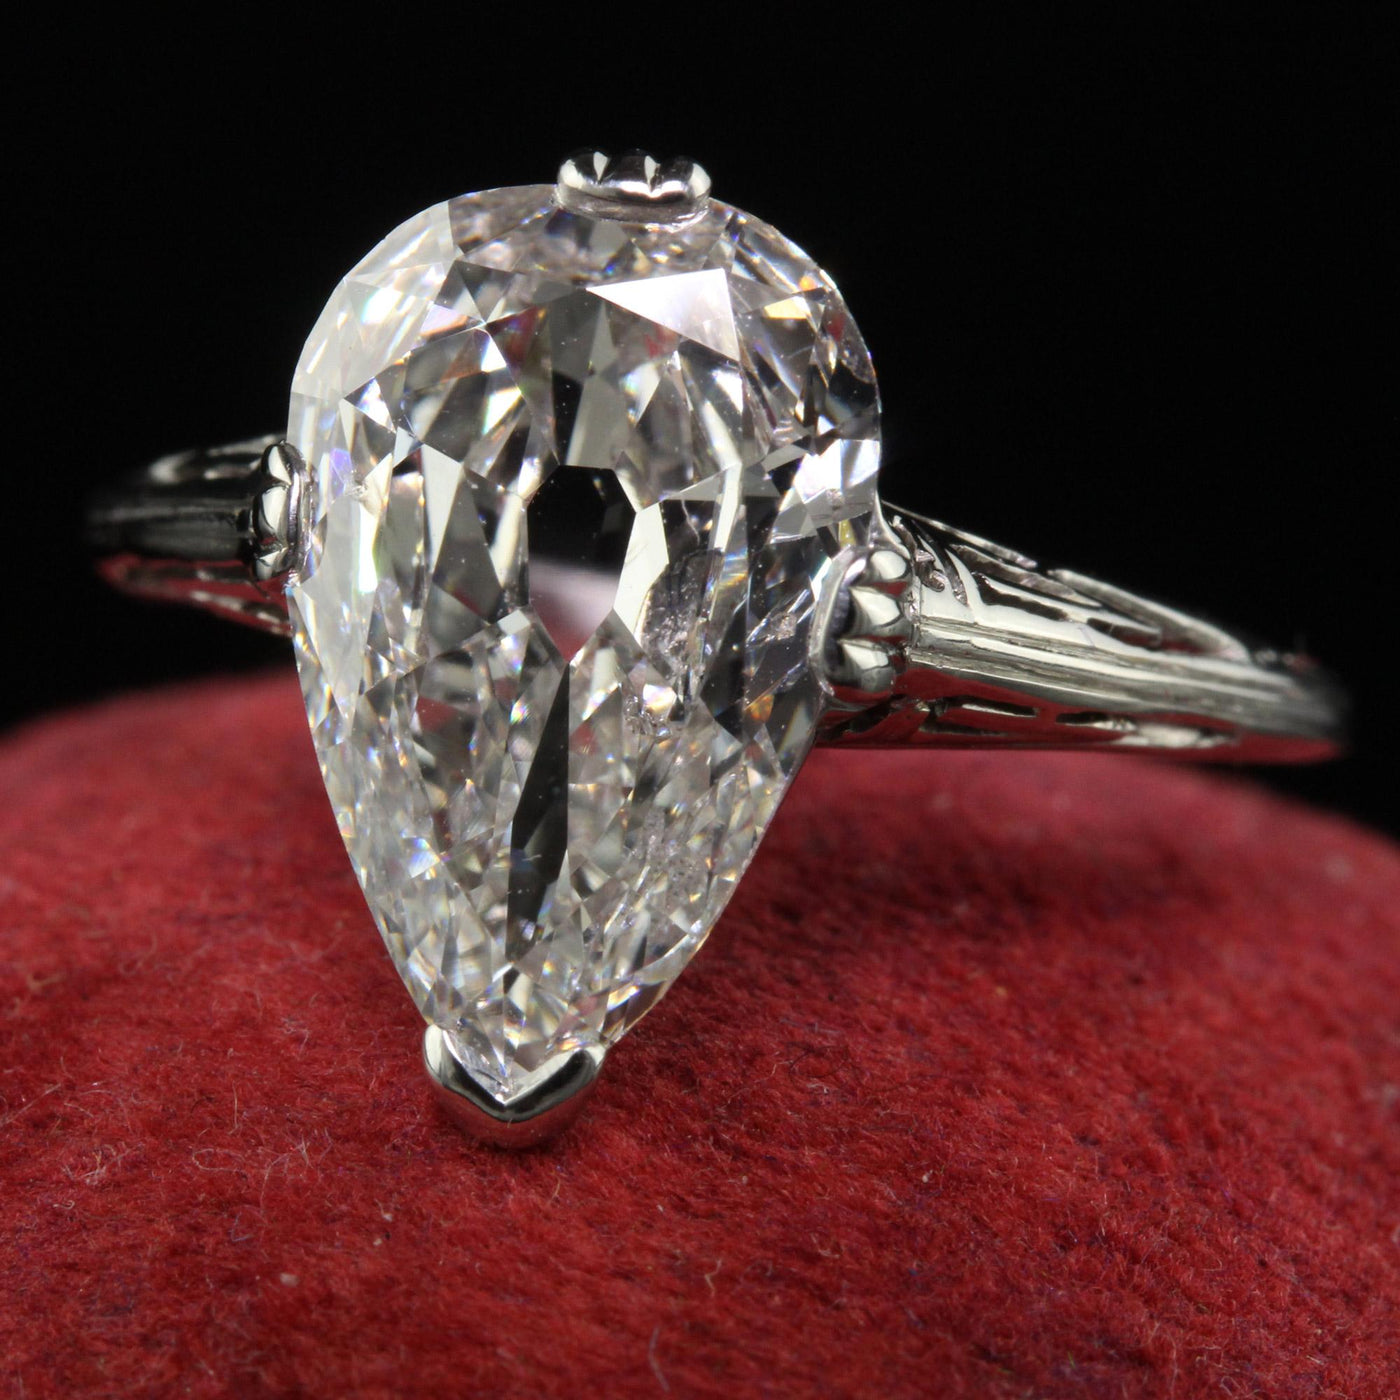 Antique Art Deco Marcus and Co Platinum Old Pear Diamond Engagement Ring - GIA